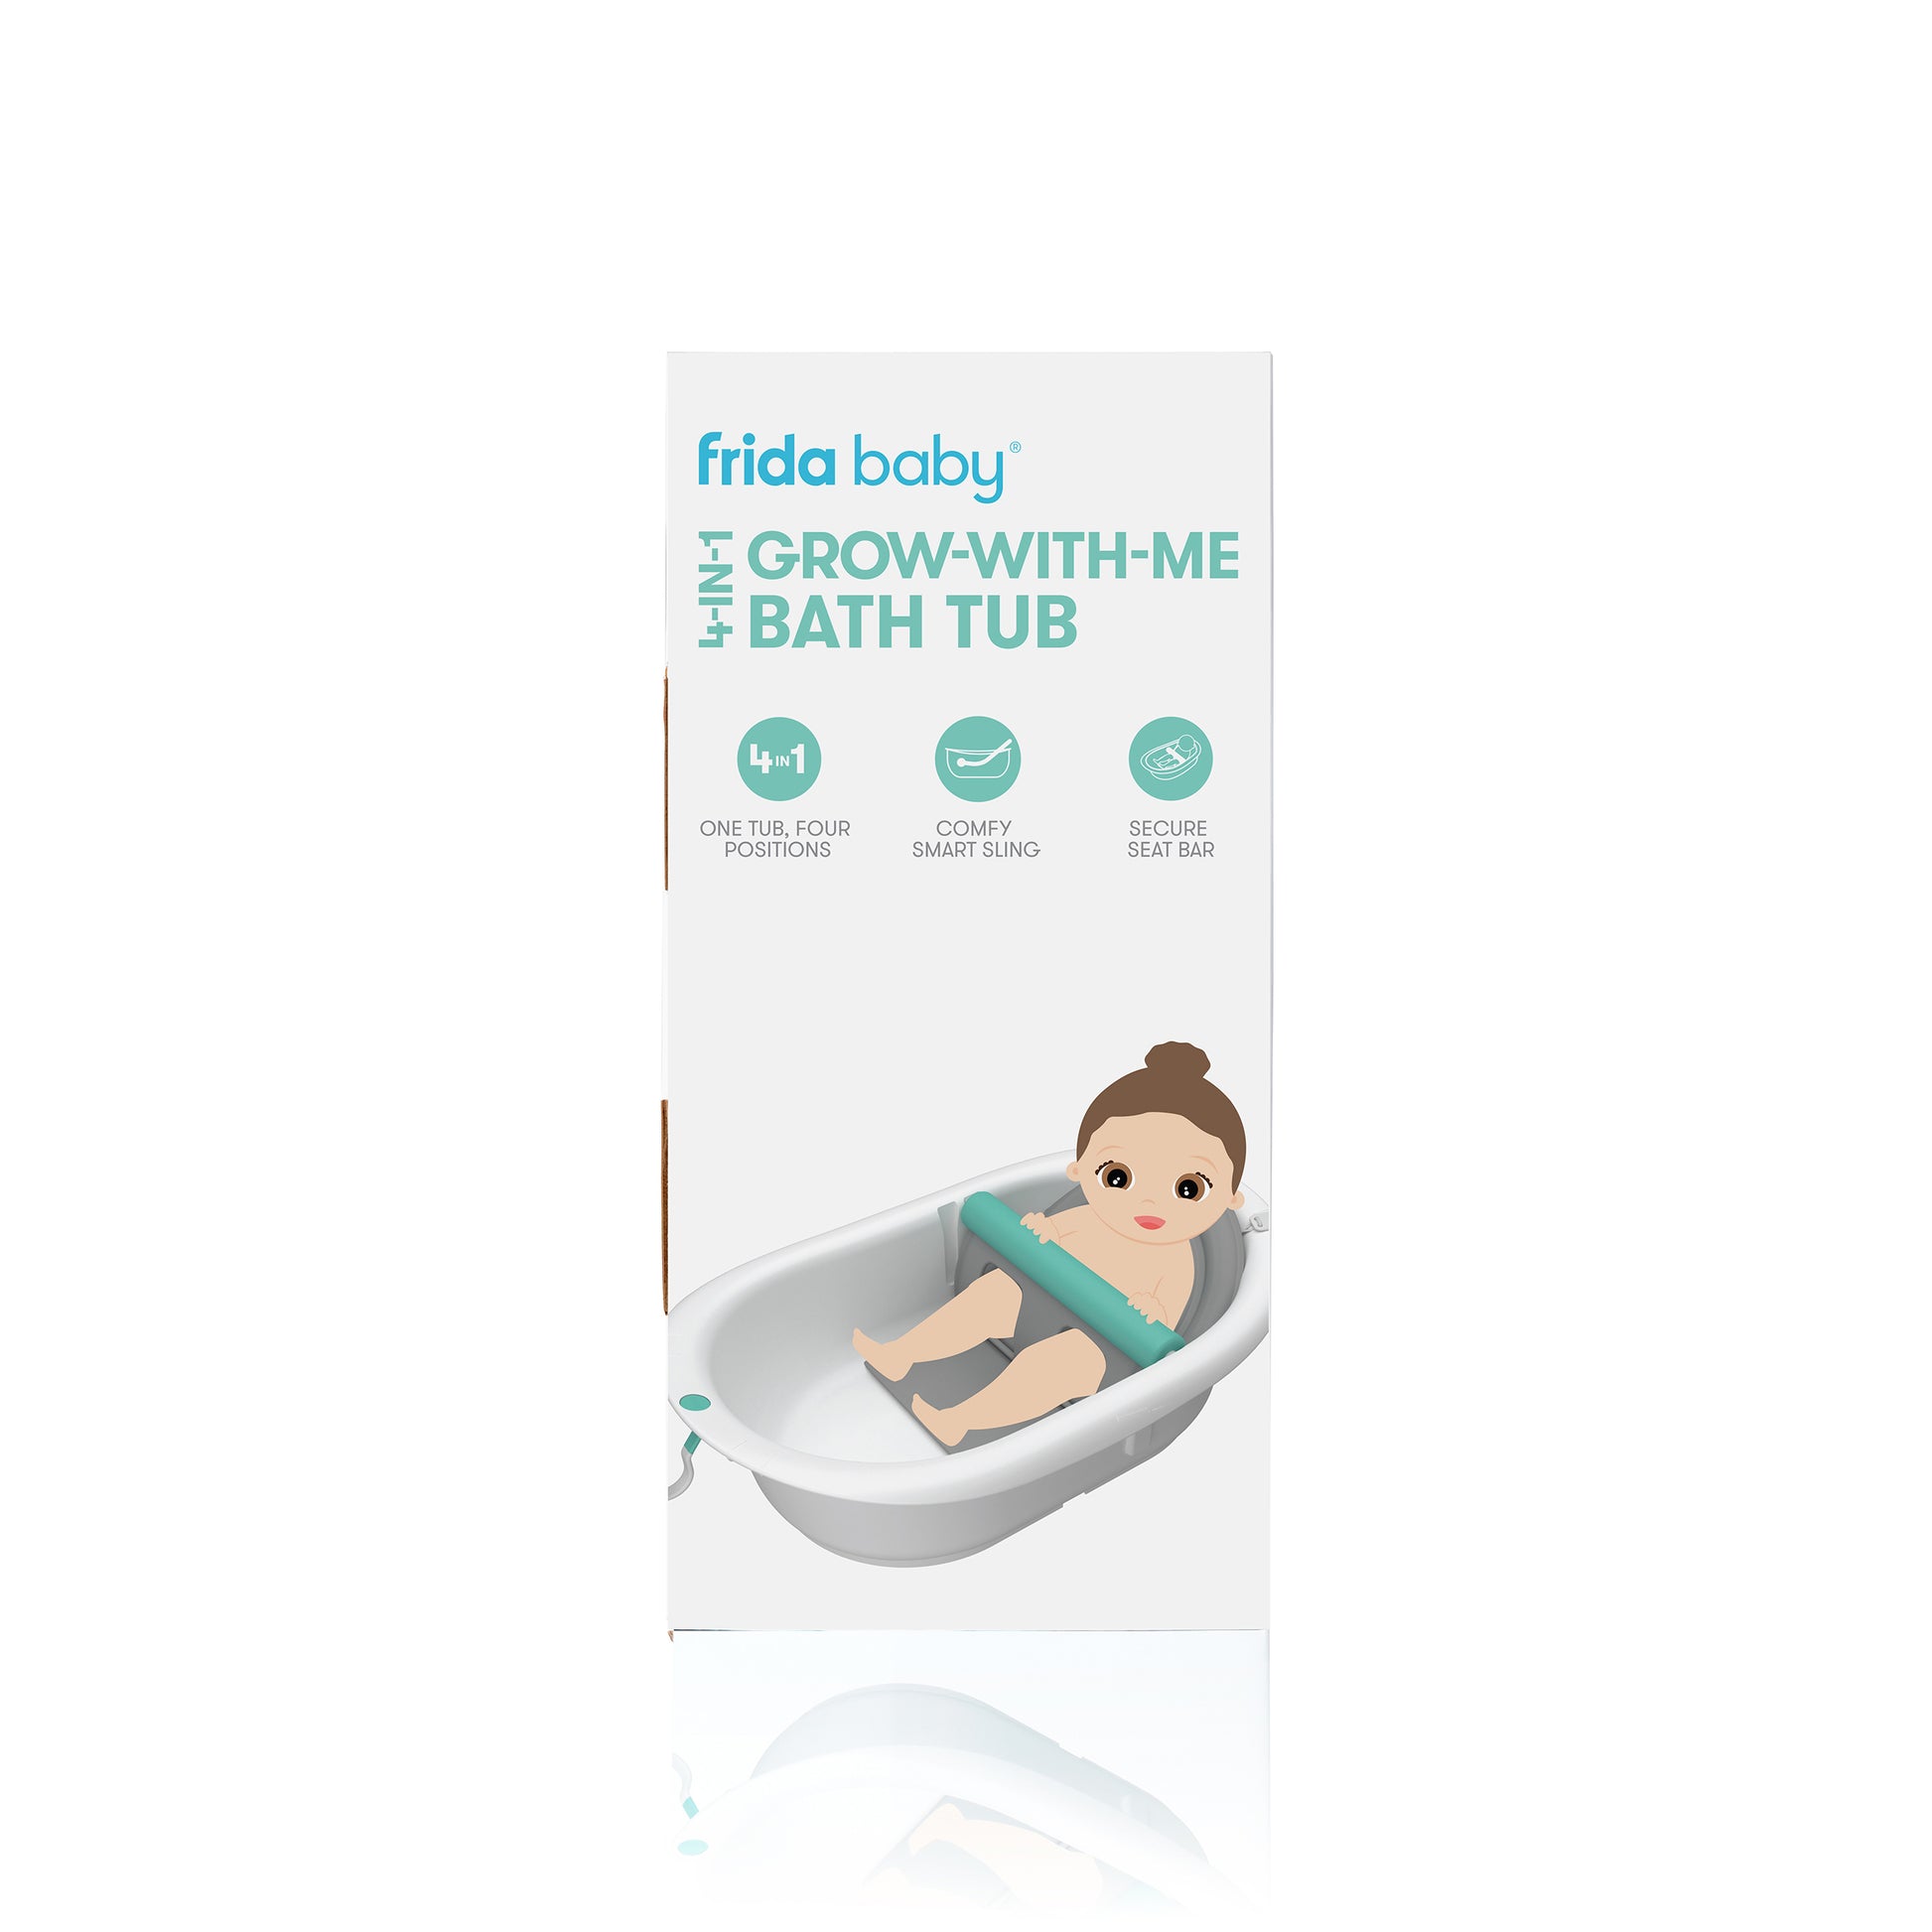 Product details about Frida Baby 4-in-1 Grow-with-Me Bath Tub